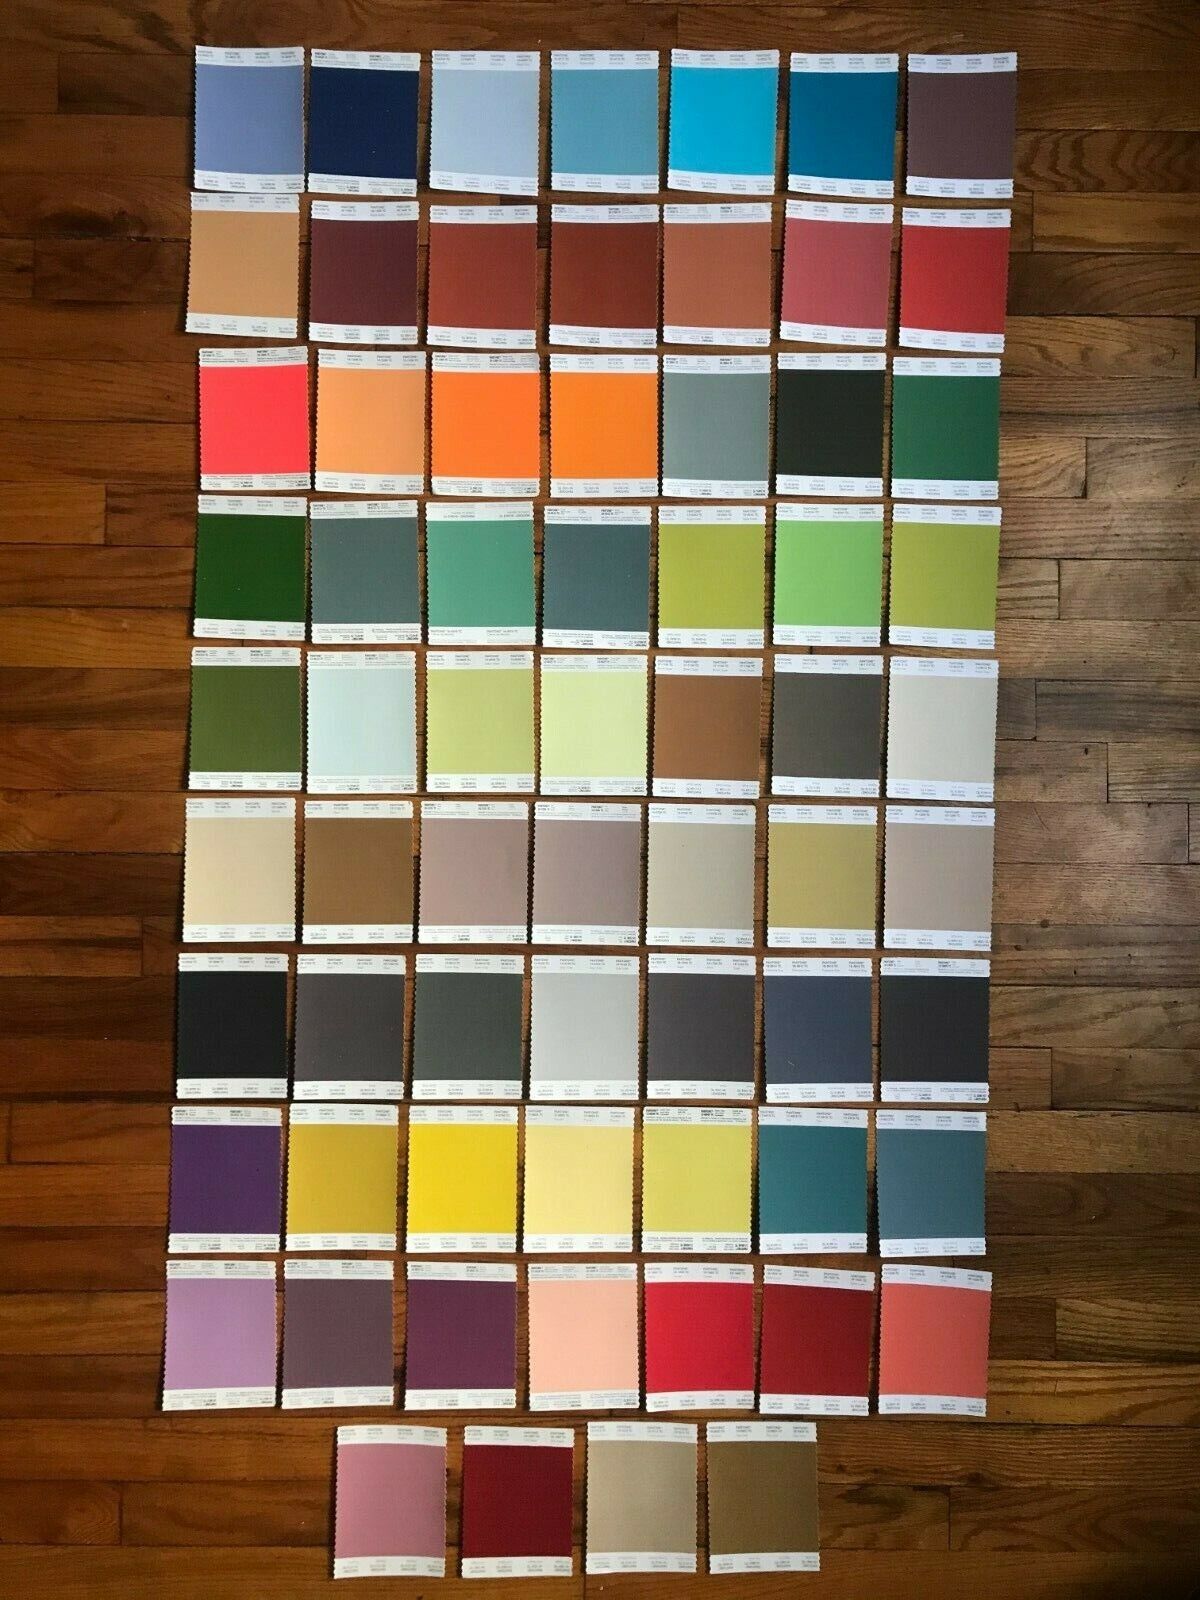 PANTONE FABRIC New products world's highest quality popular SWATCH COLLECTION 68 PCS - Los Angeles Mall YE GREEN BLUE ORANGE